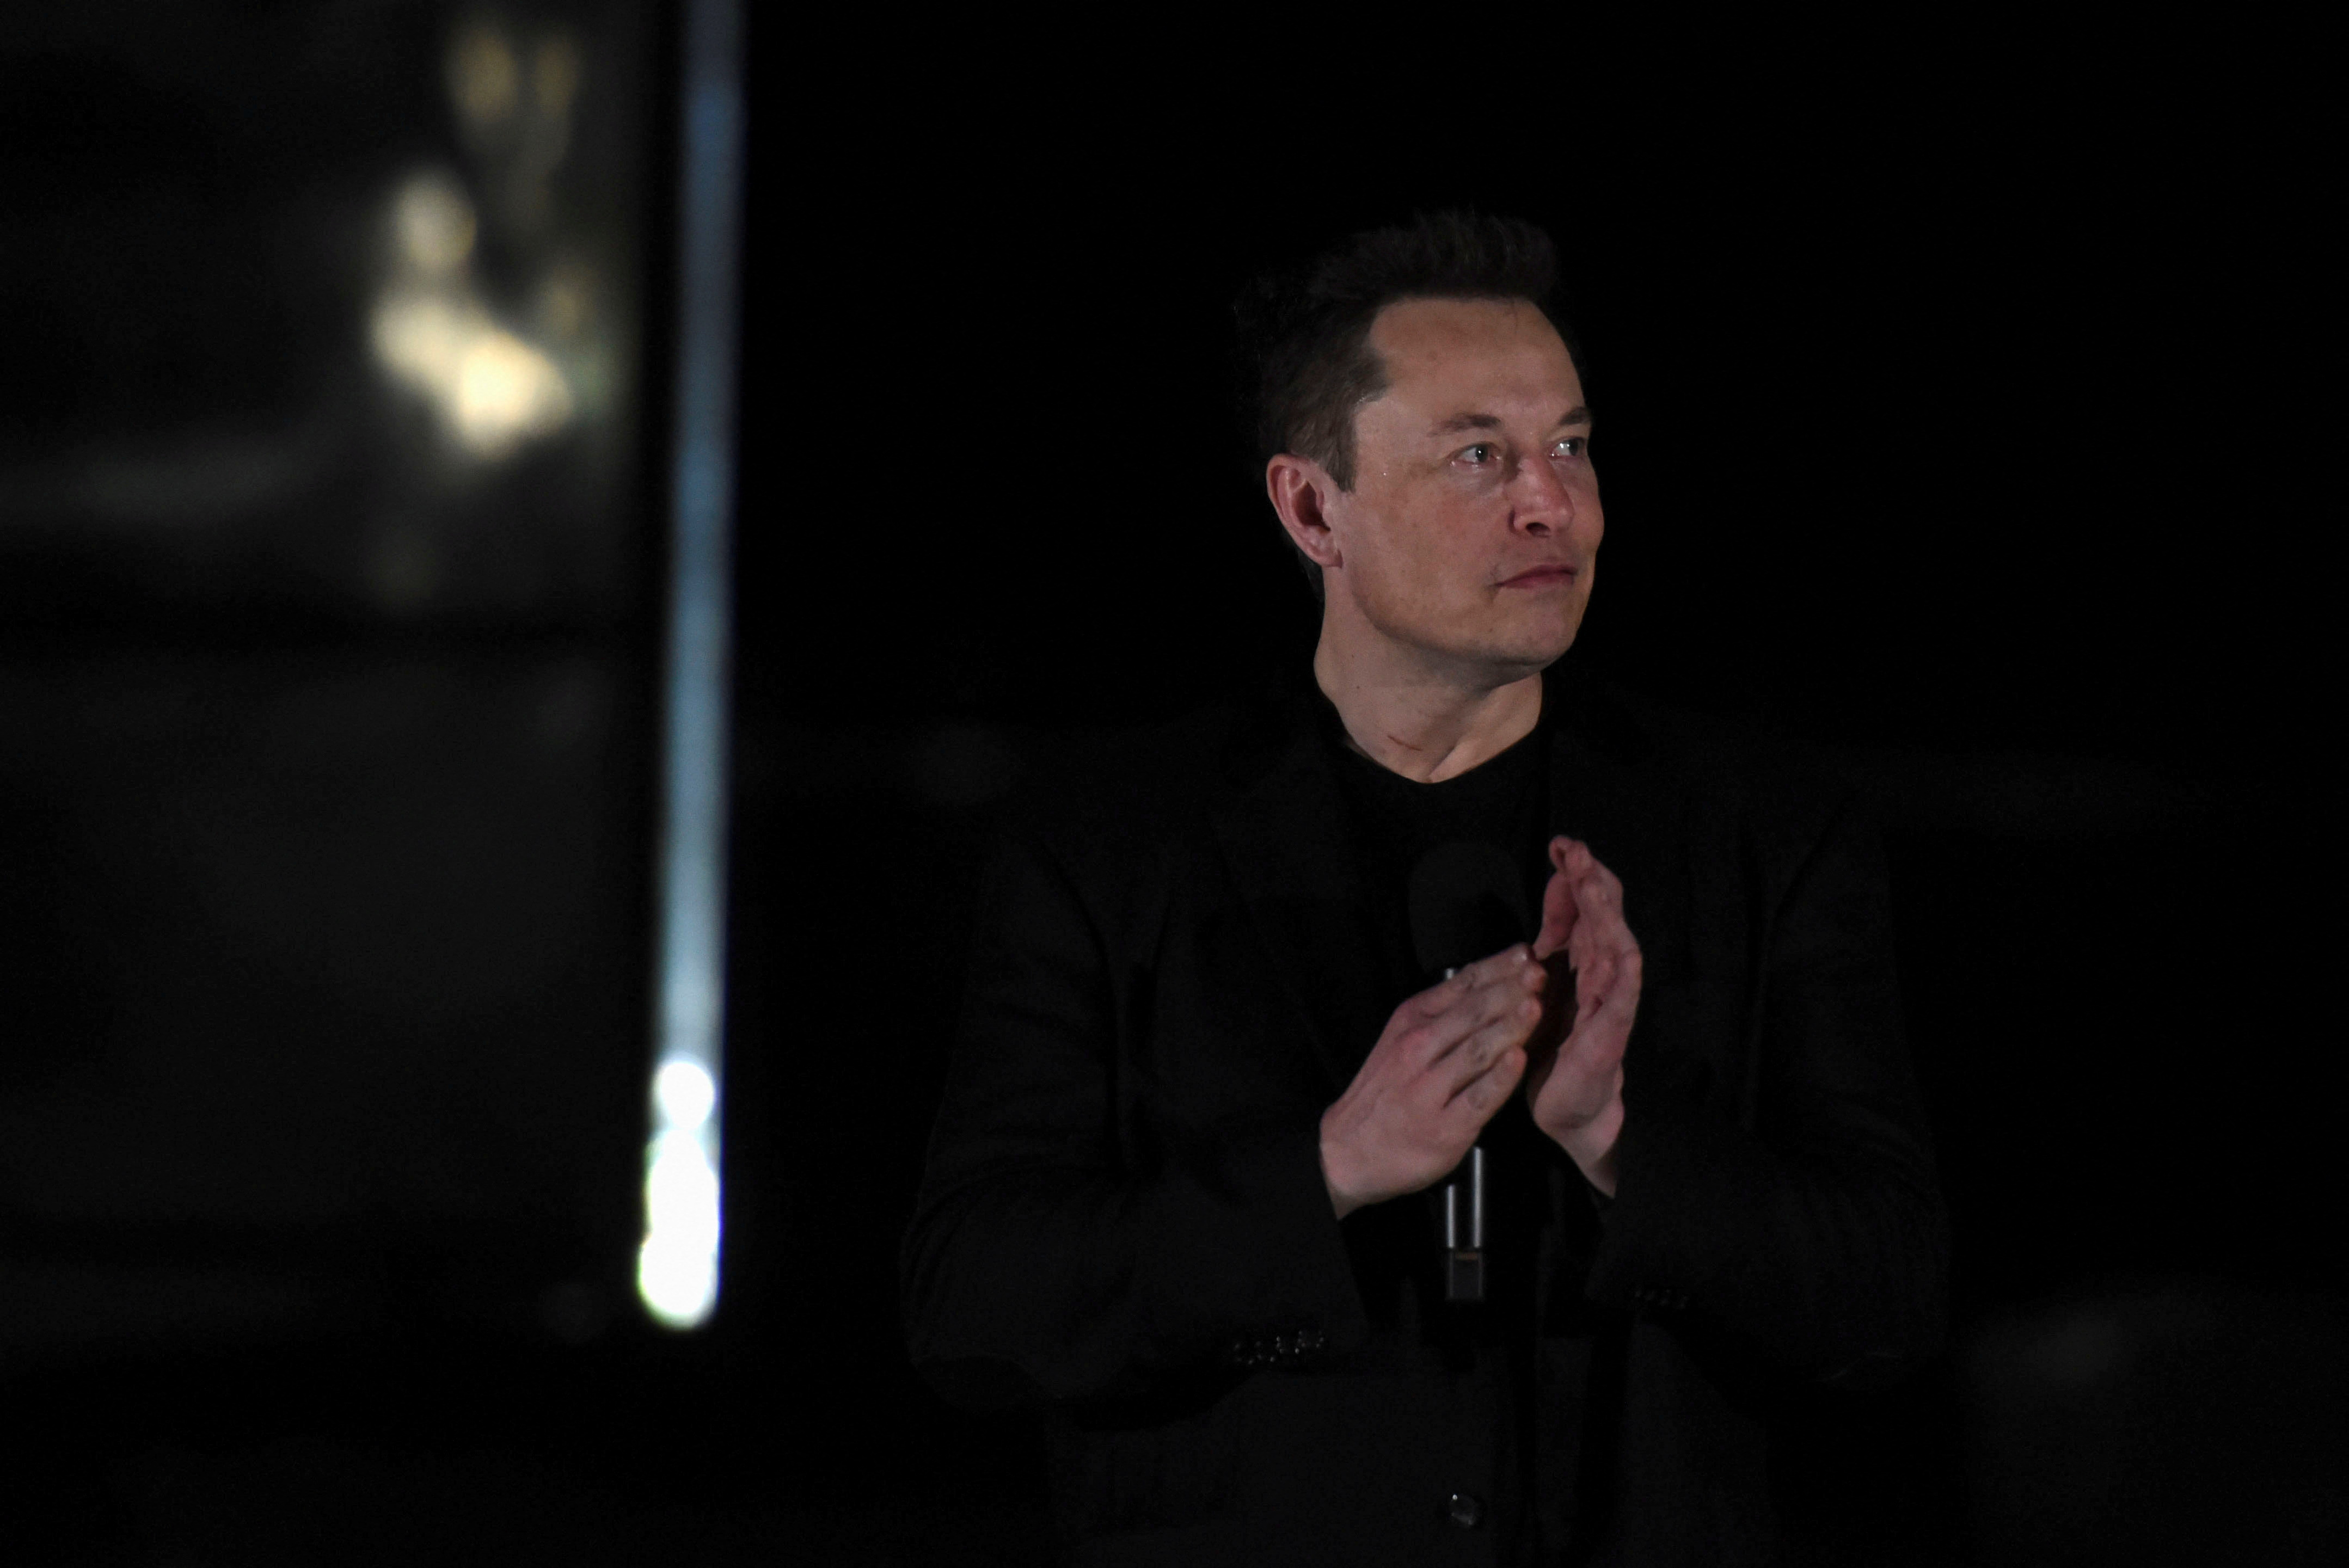 SpaceX's Elon Musk gives an update on the company's Mars rocket Starship in Boca Chica